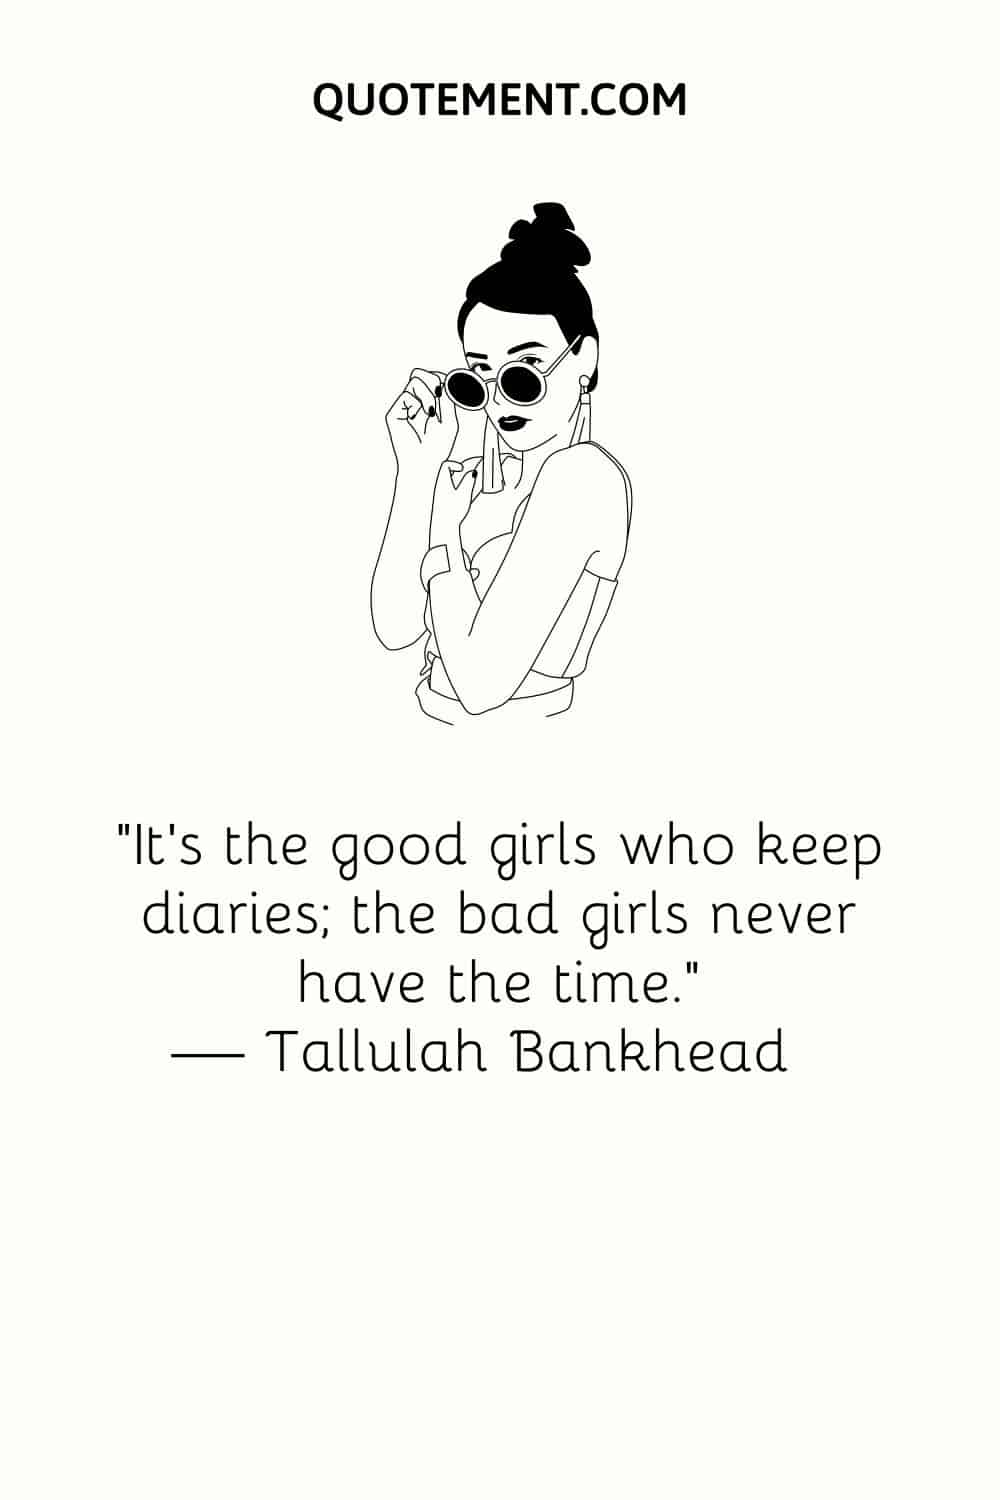 “It’s the good girls who keep diaries; the bad girls never have the time.” — Tallulah Bankhead